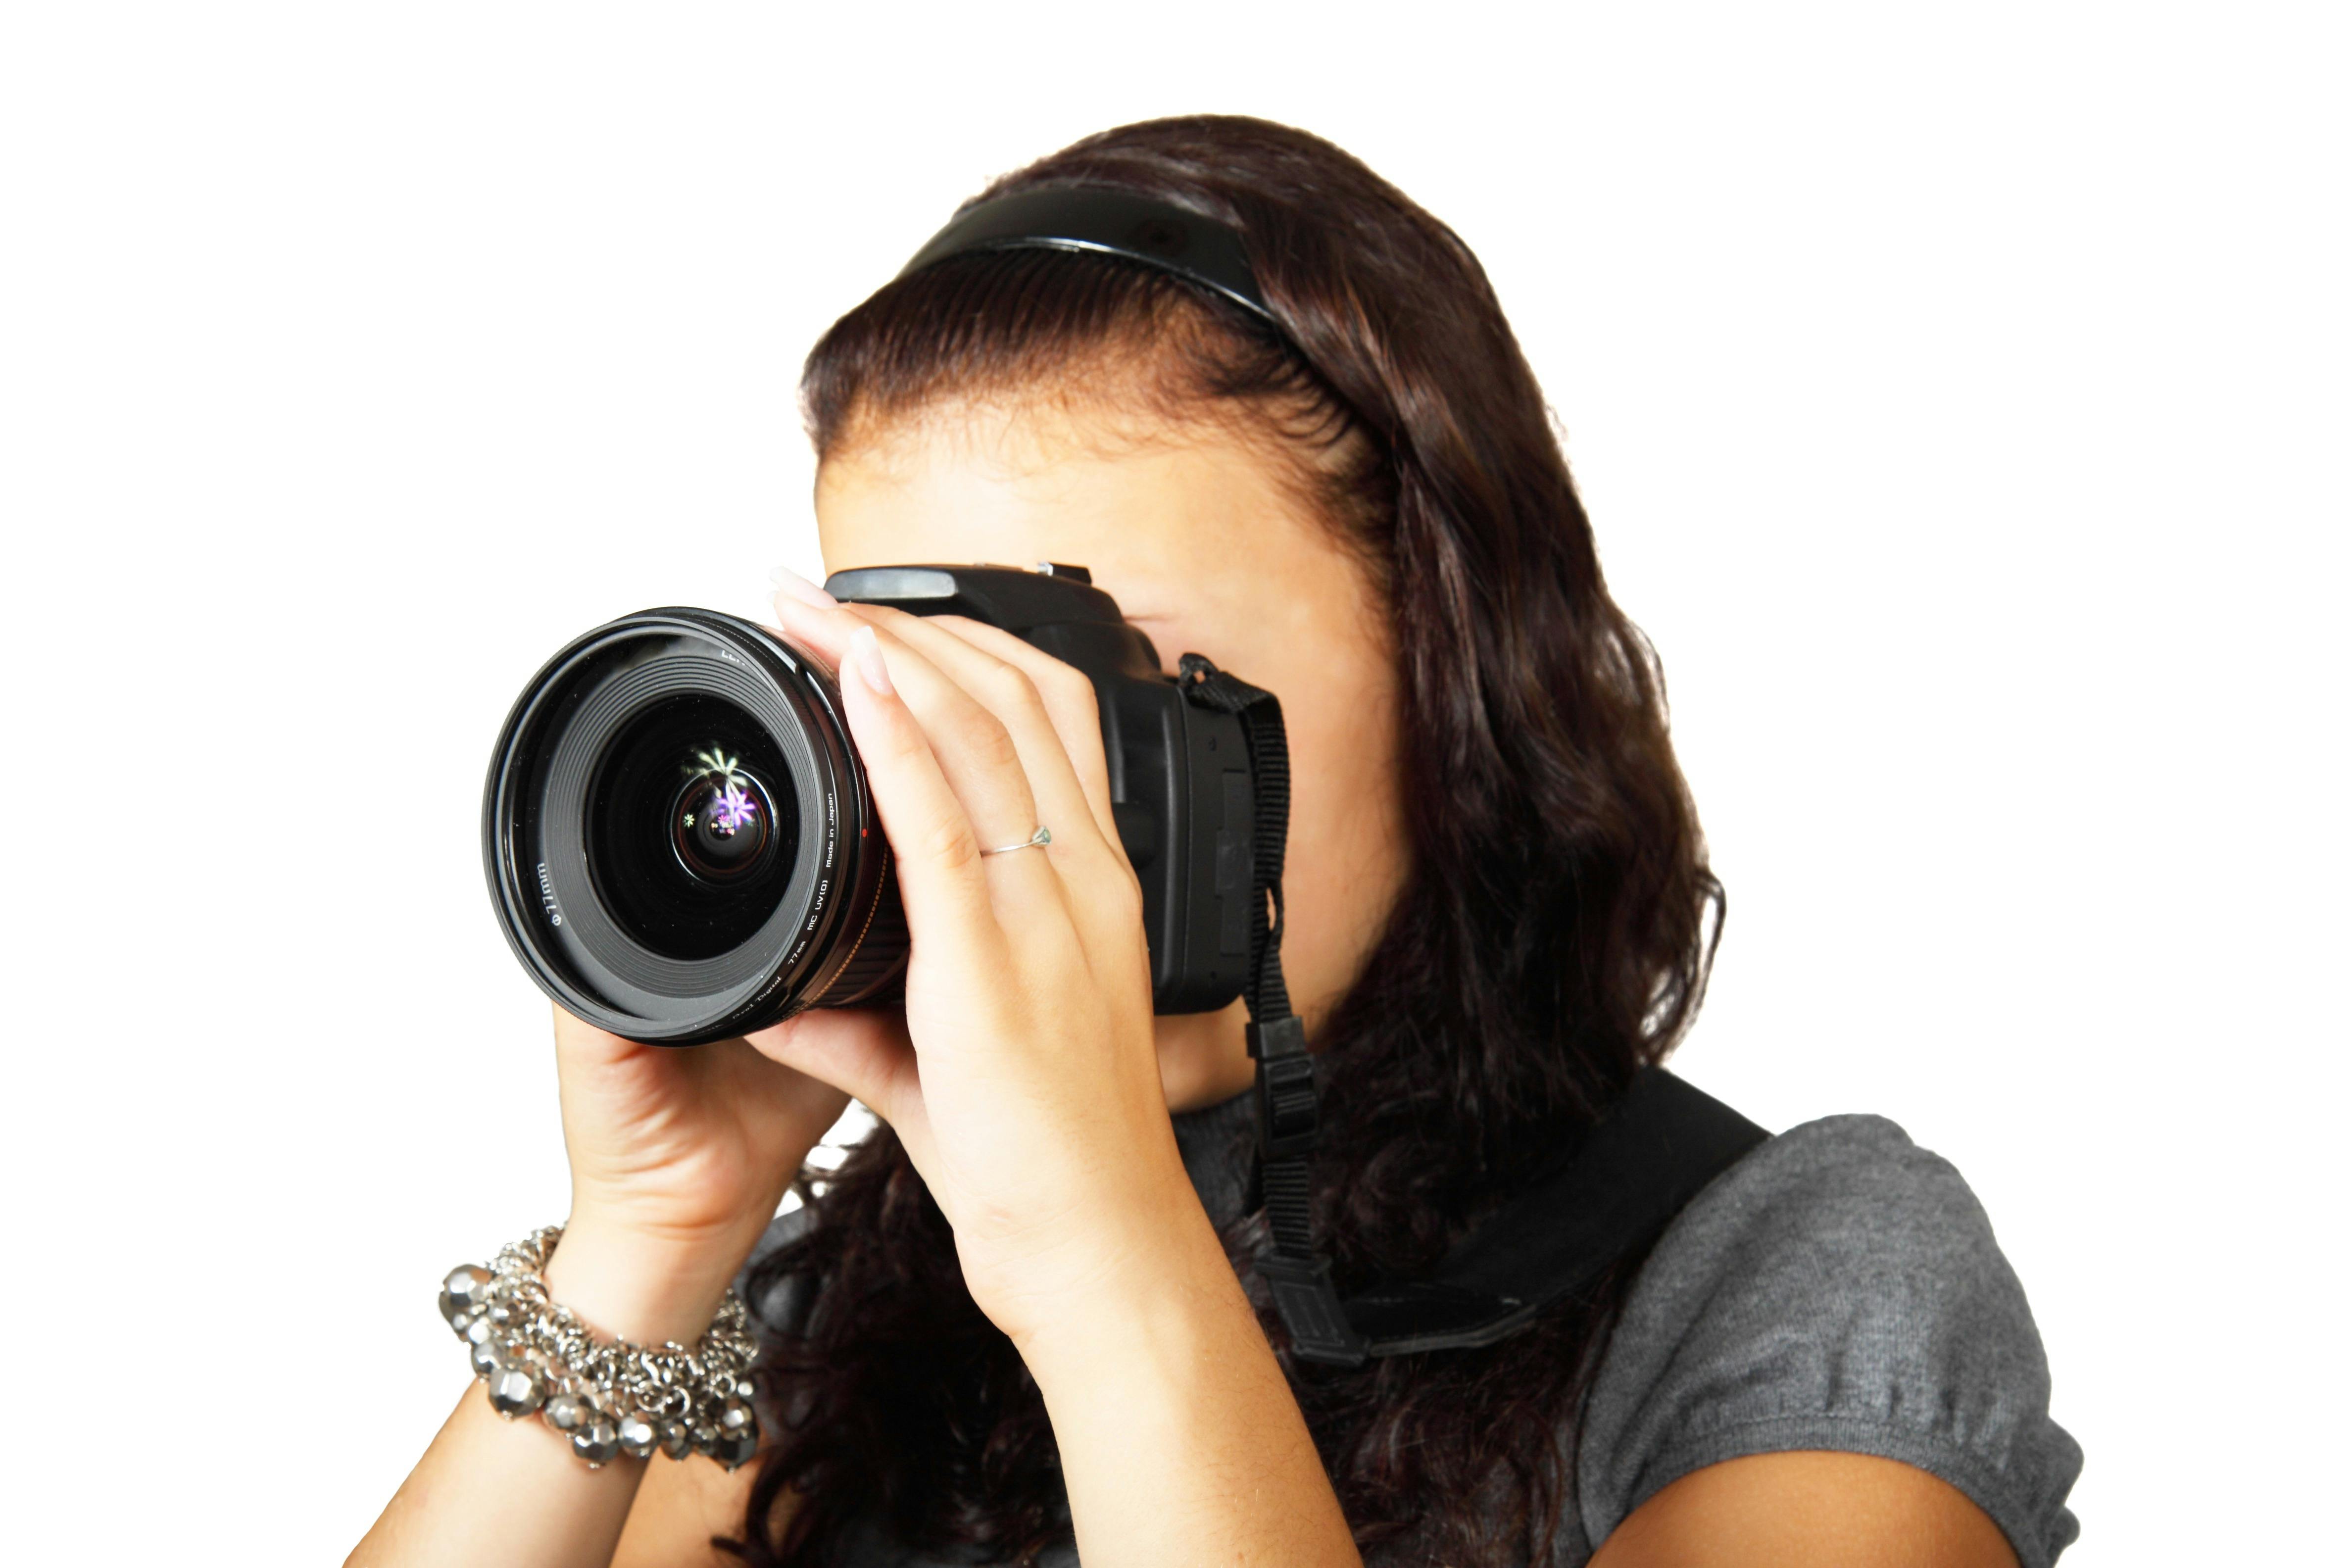  Woman  in Grey Shirt Taking Picture With Dslr Camera   Free 